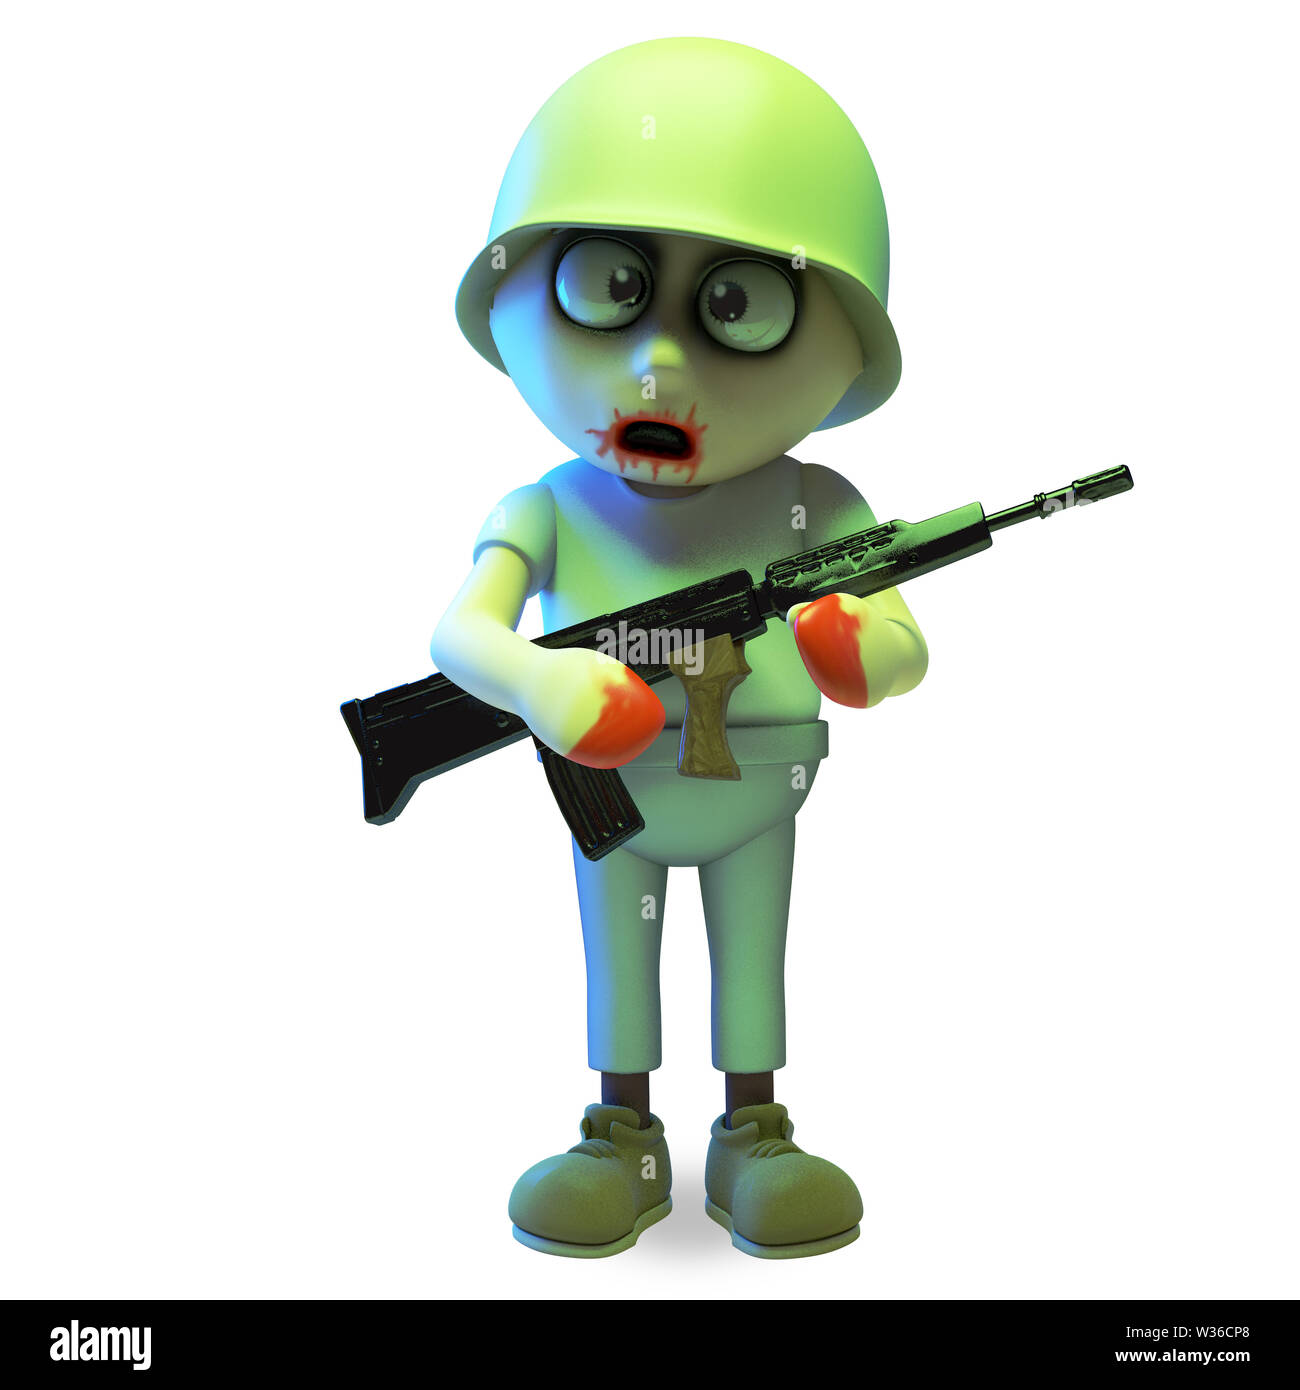 Undead zombie monster soldier carrying a rifle, 3d illustration render Stock Photo